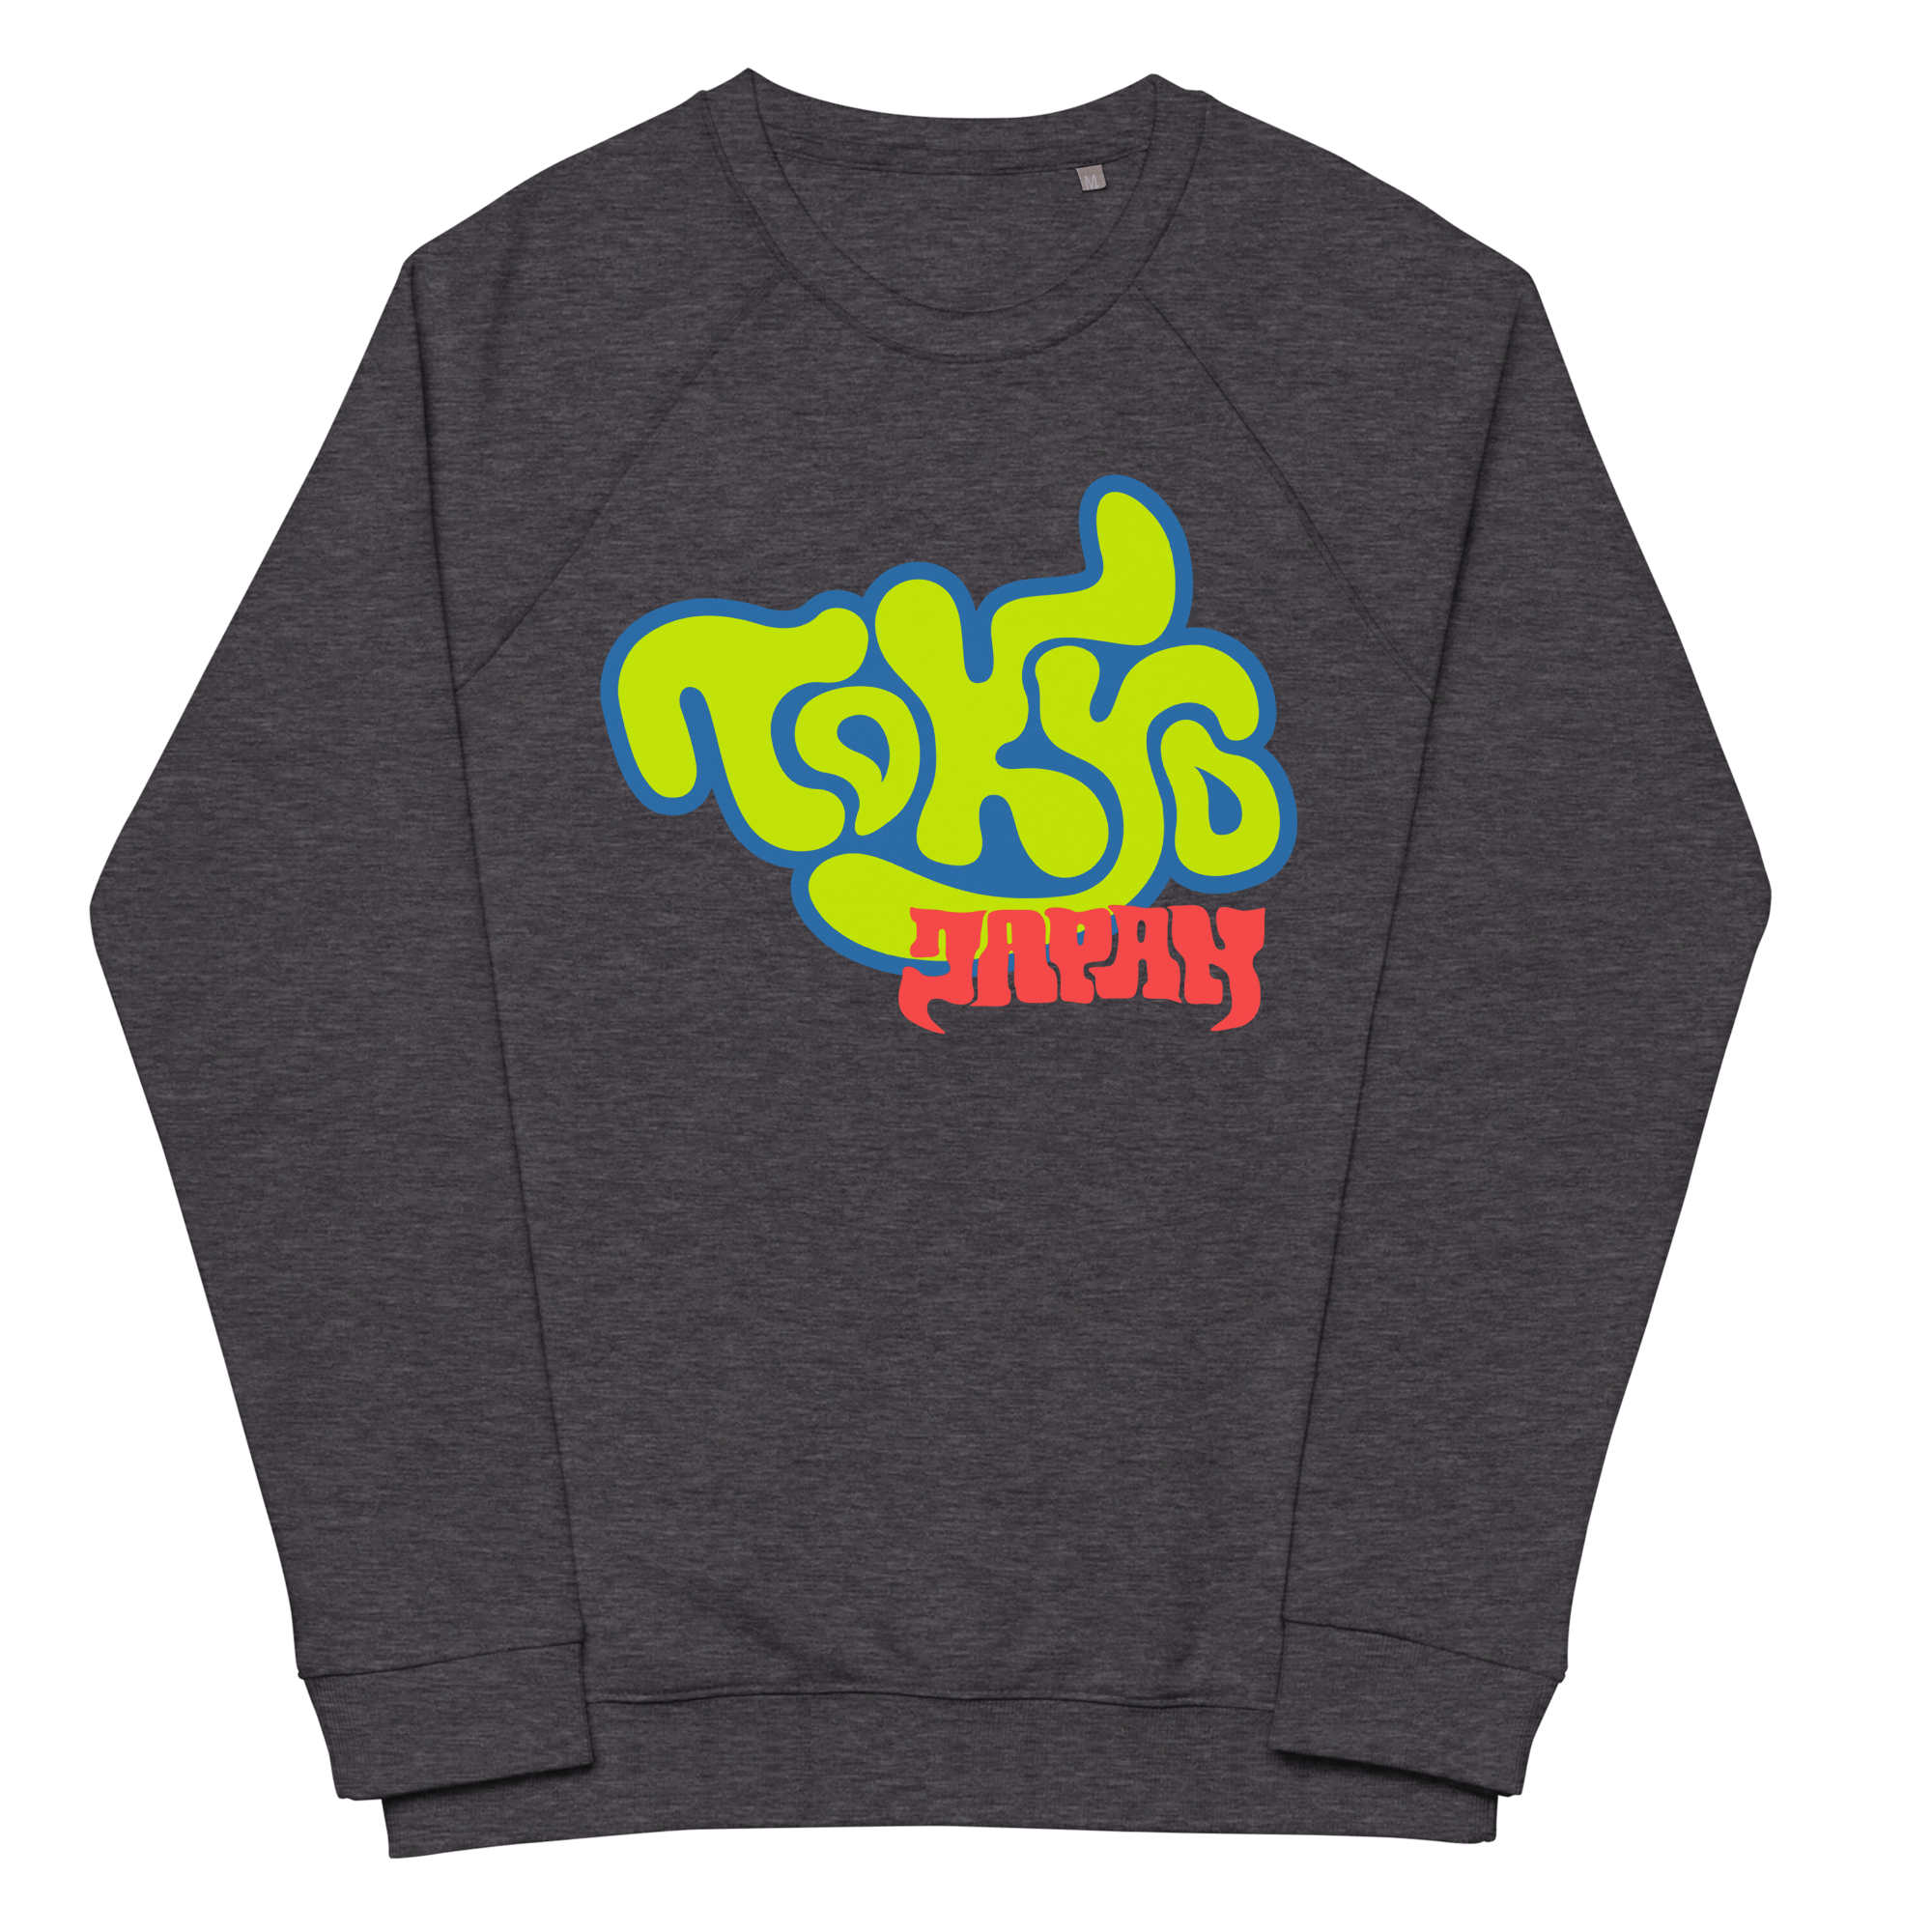 Tokyo Japan Raglan SweatshirtWrap yourself in comfort and style with the Tokyo Japan Raglan Sweatshirt. Achieve the perfect blend of coziness and fashion with this unisex organic gem. Its brushed fleece lining is like a cloud of softness, while the 100% c